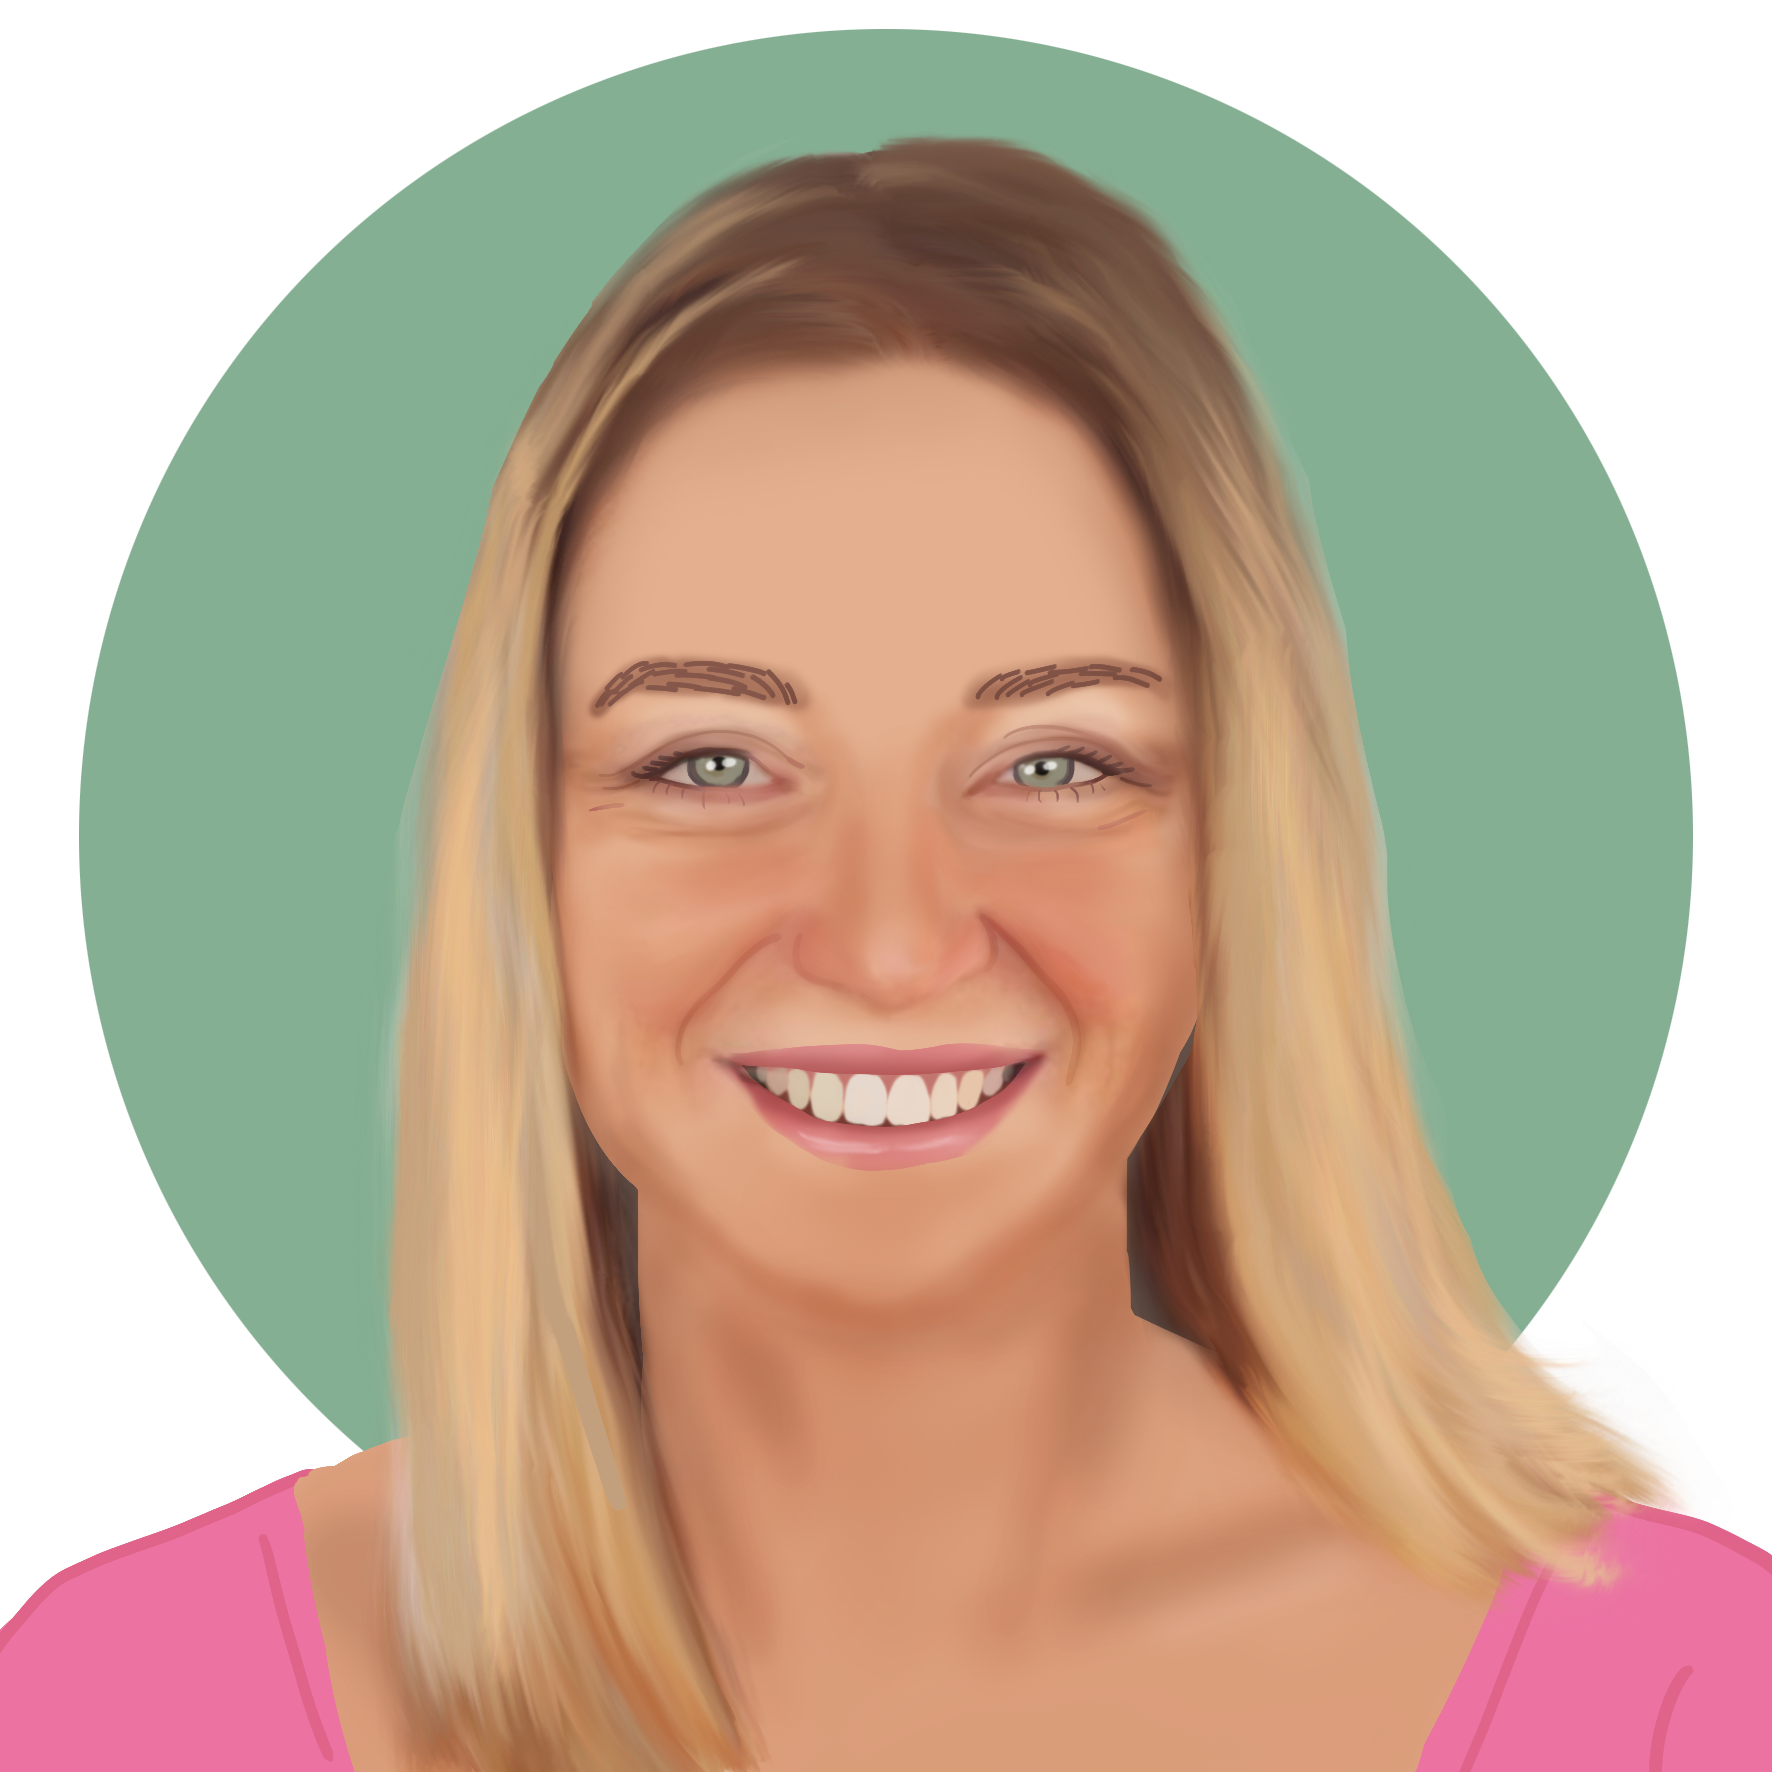 Profile illustration of Emily Willis with blonde shoulder length hair, pink top on a circled green background